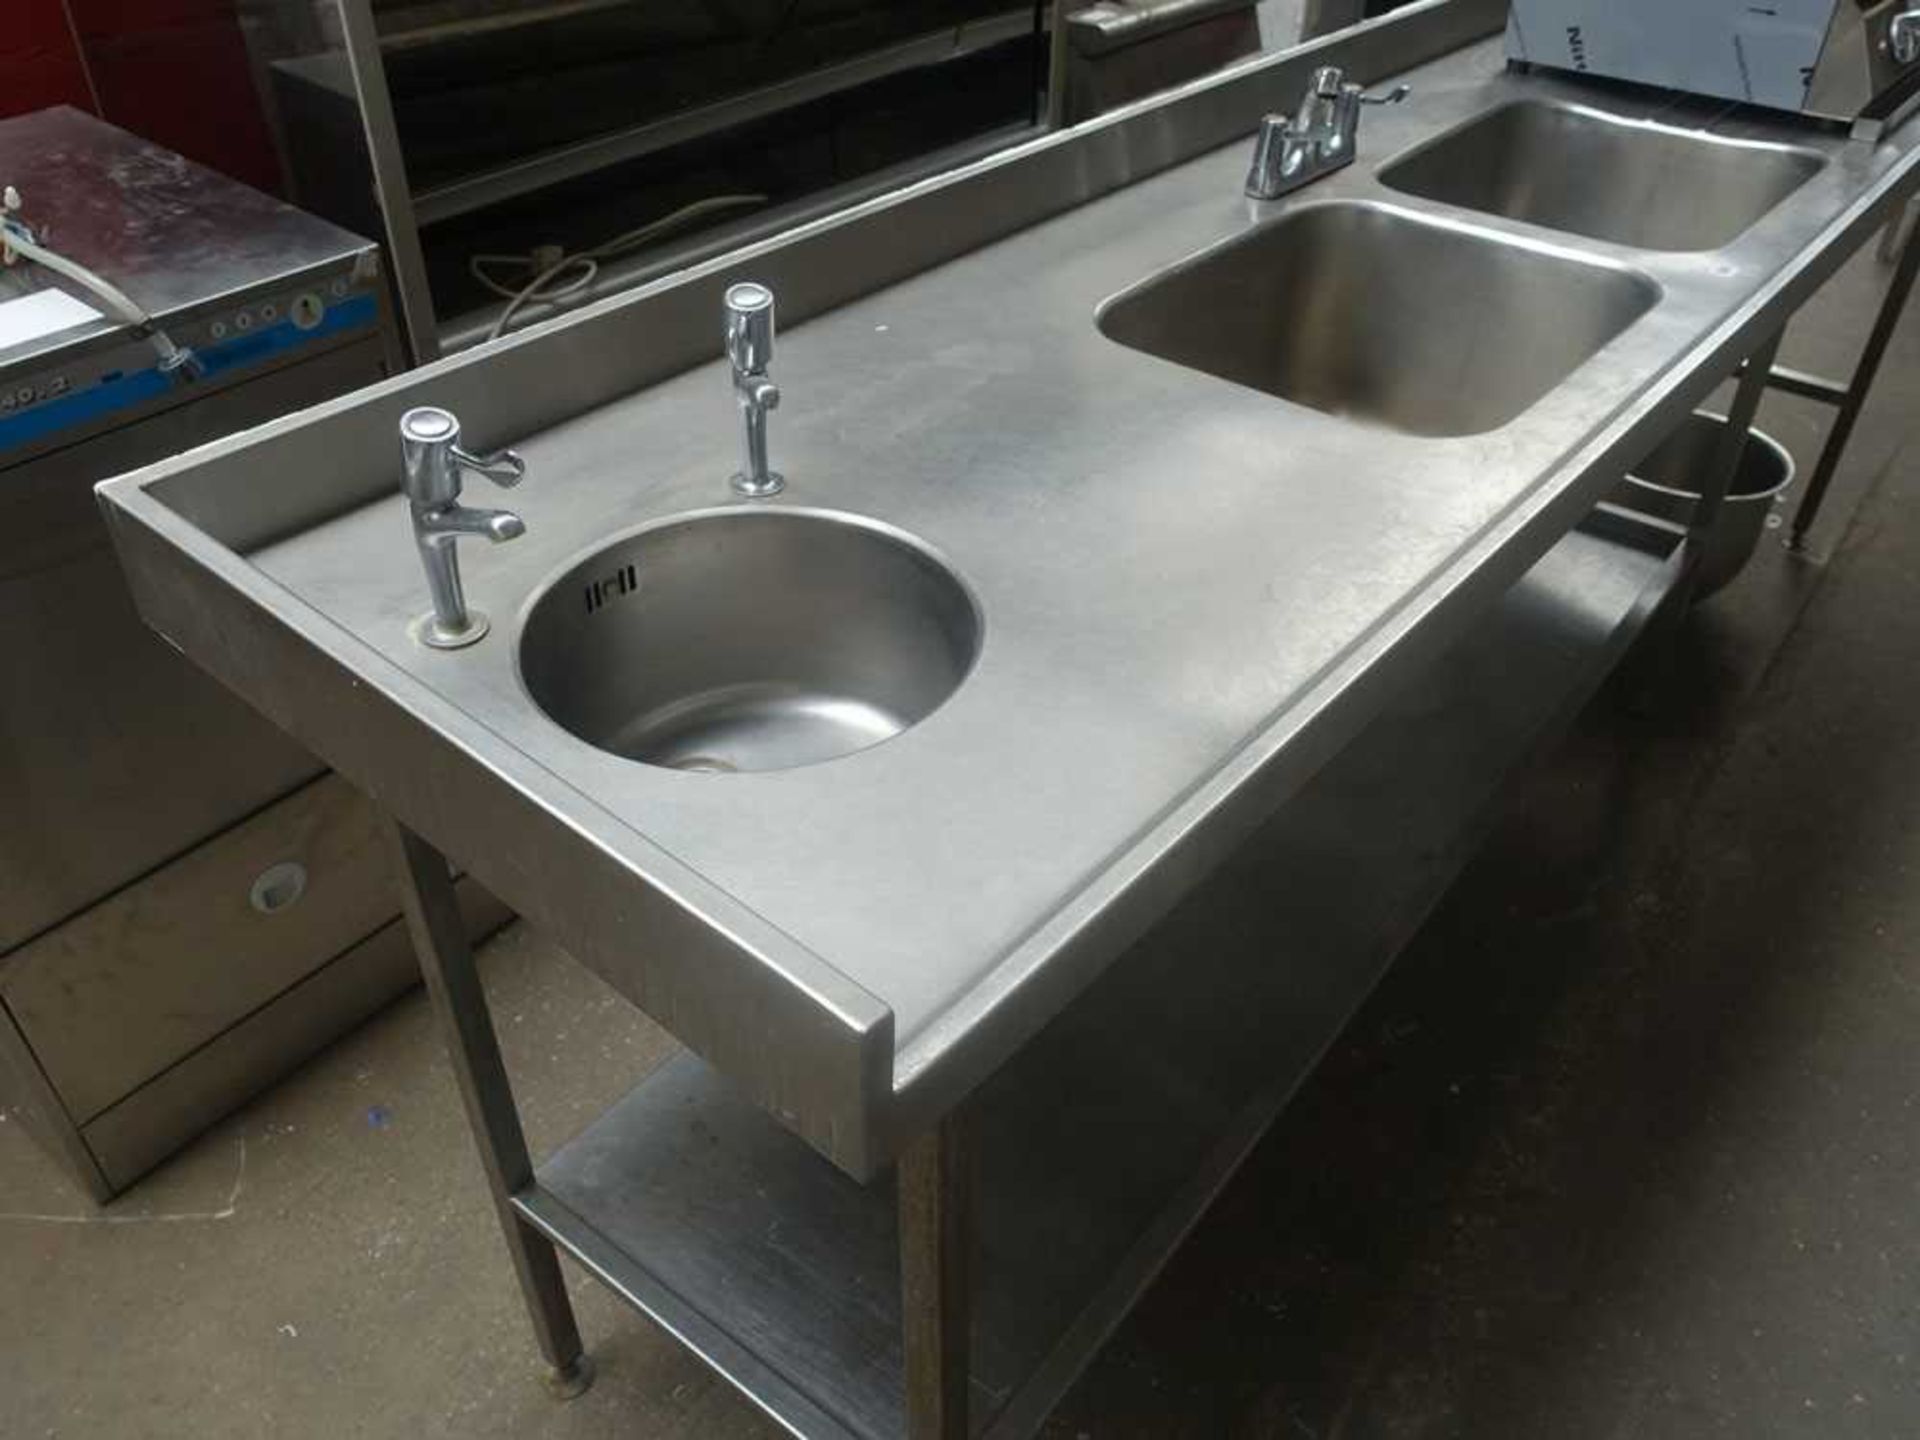 260cm stainless steel double bowl sink unit hand basin with tap set and shelf under - Image 3 of 6